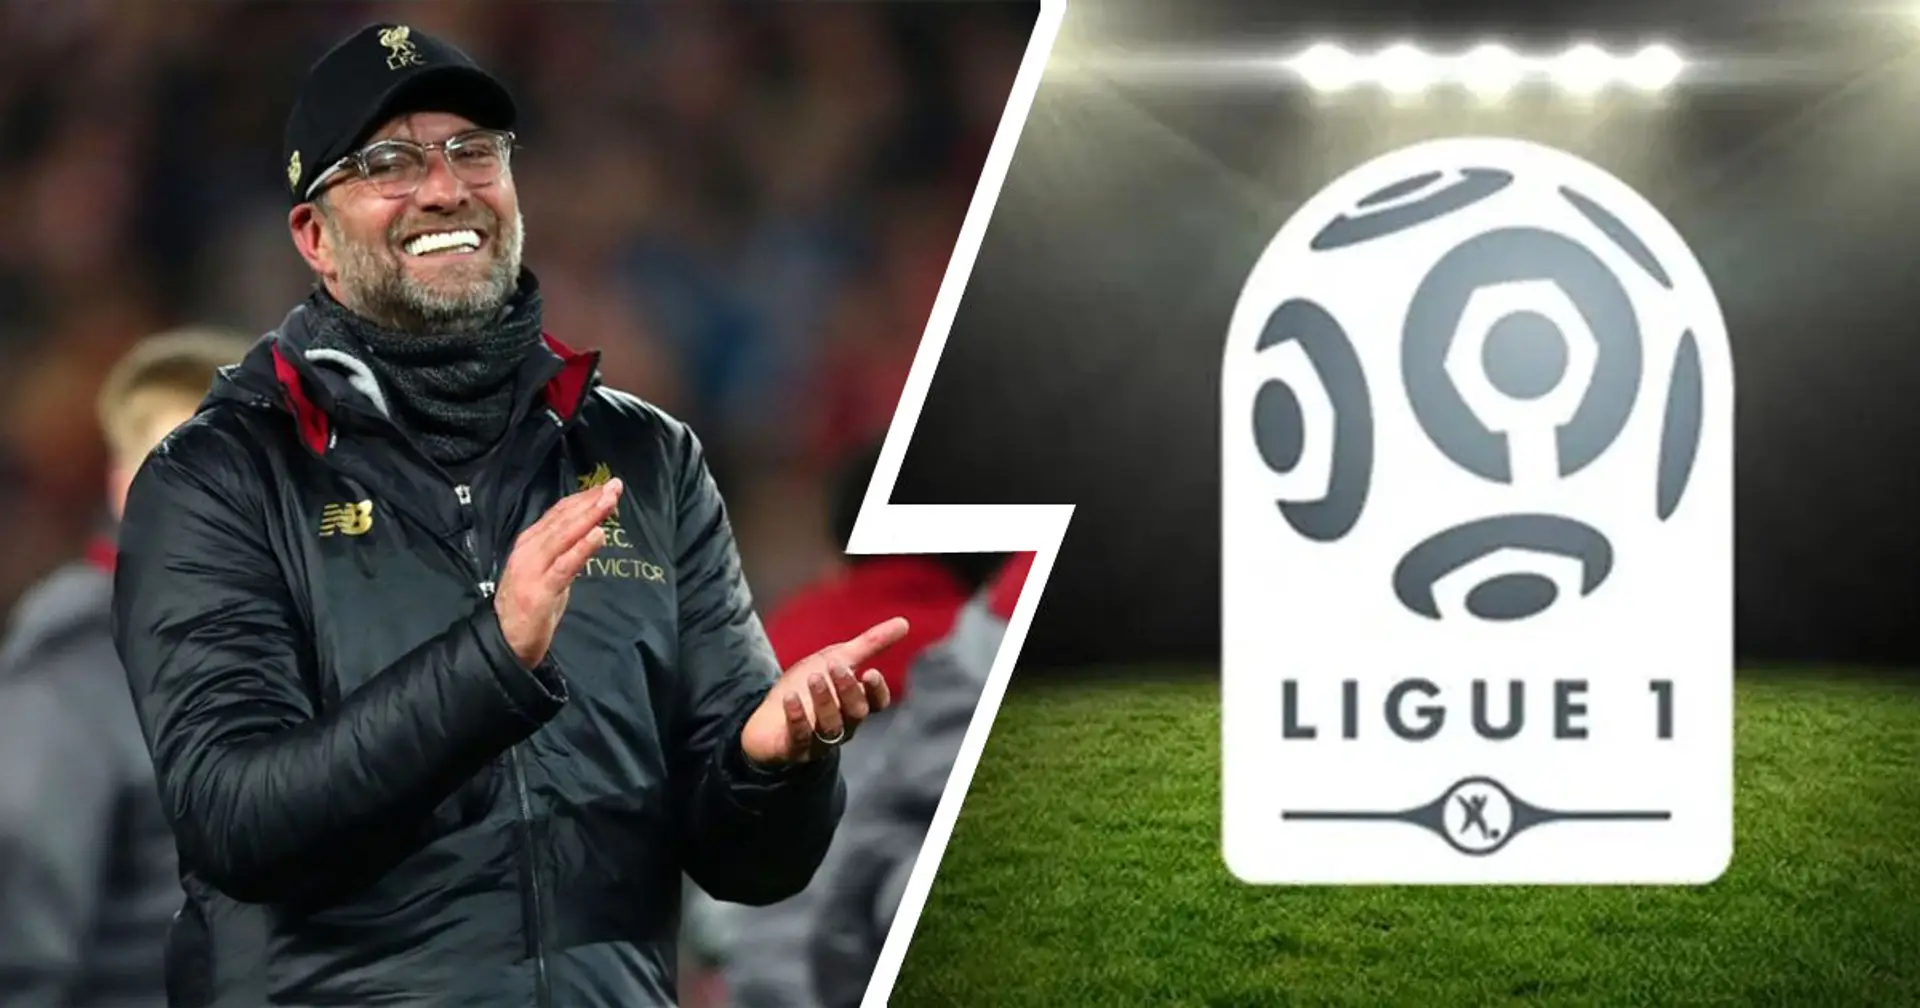 PSG confirmed as Ligue 1 champs: Here's what it could mean for Liverpool